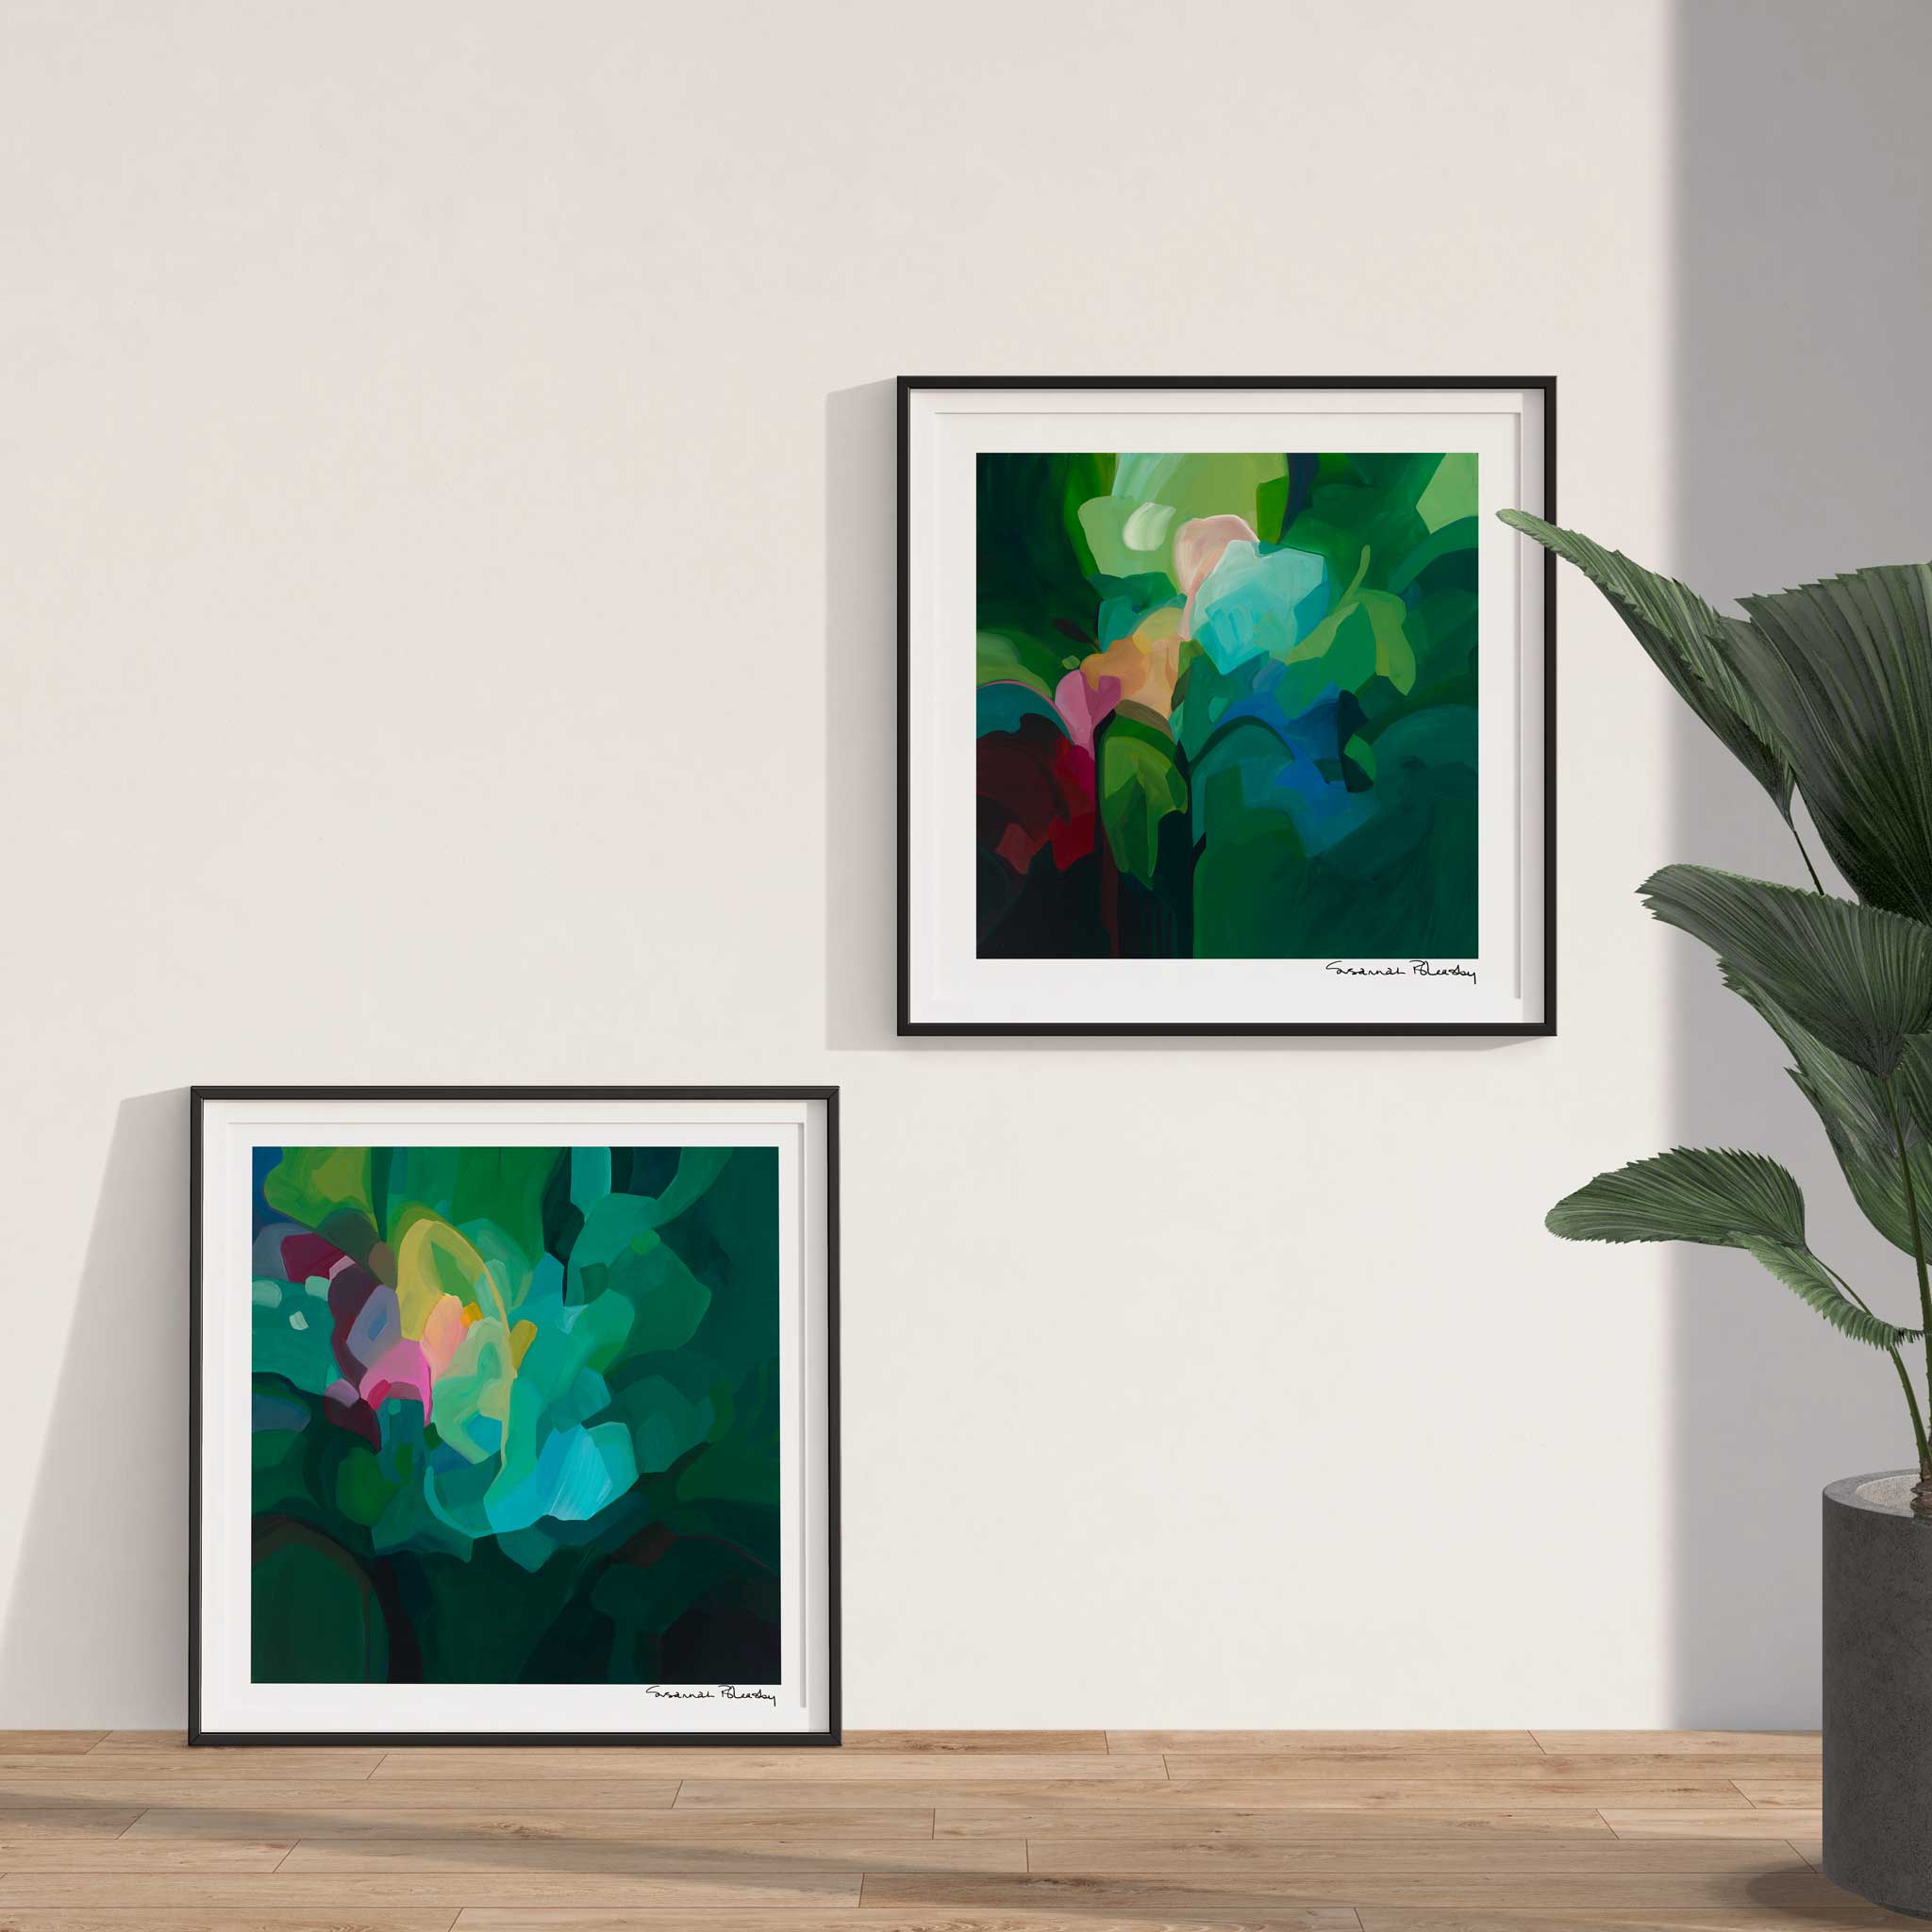 A pair of emerald green abstract art prints by Canadian abstract artist Susannah Bleasby